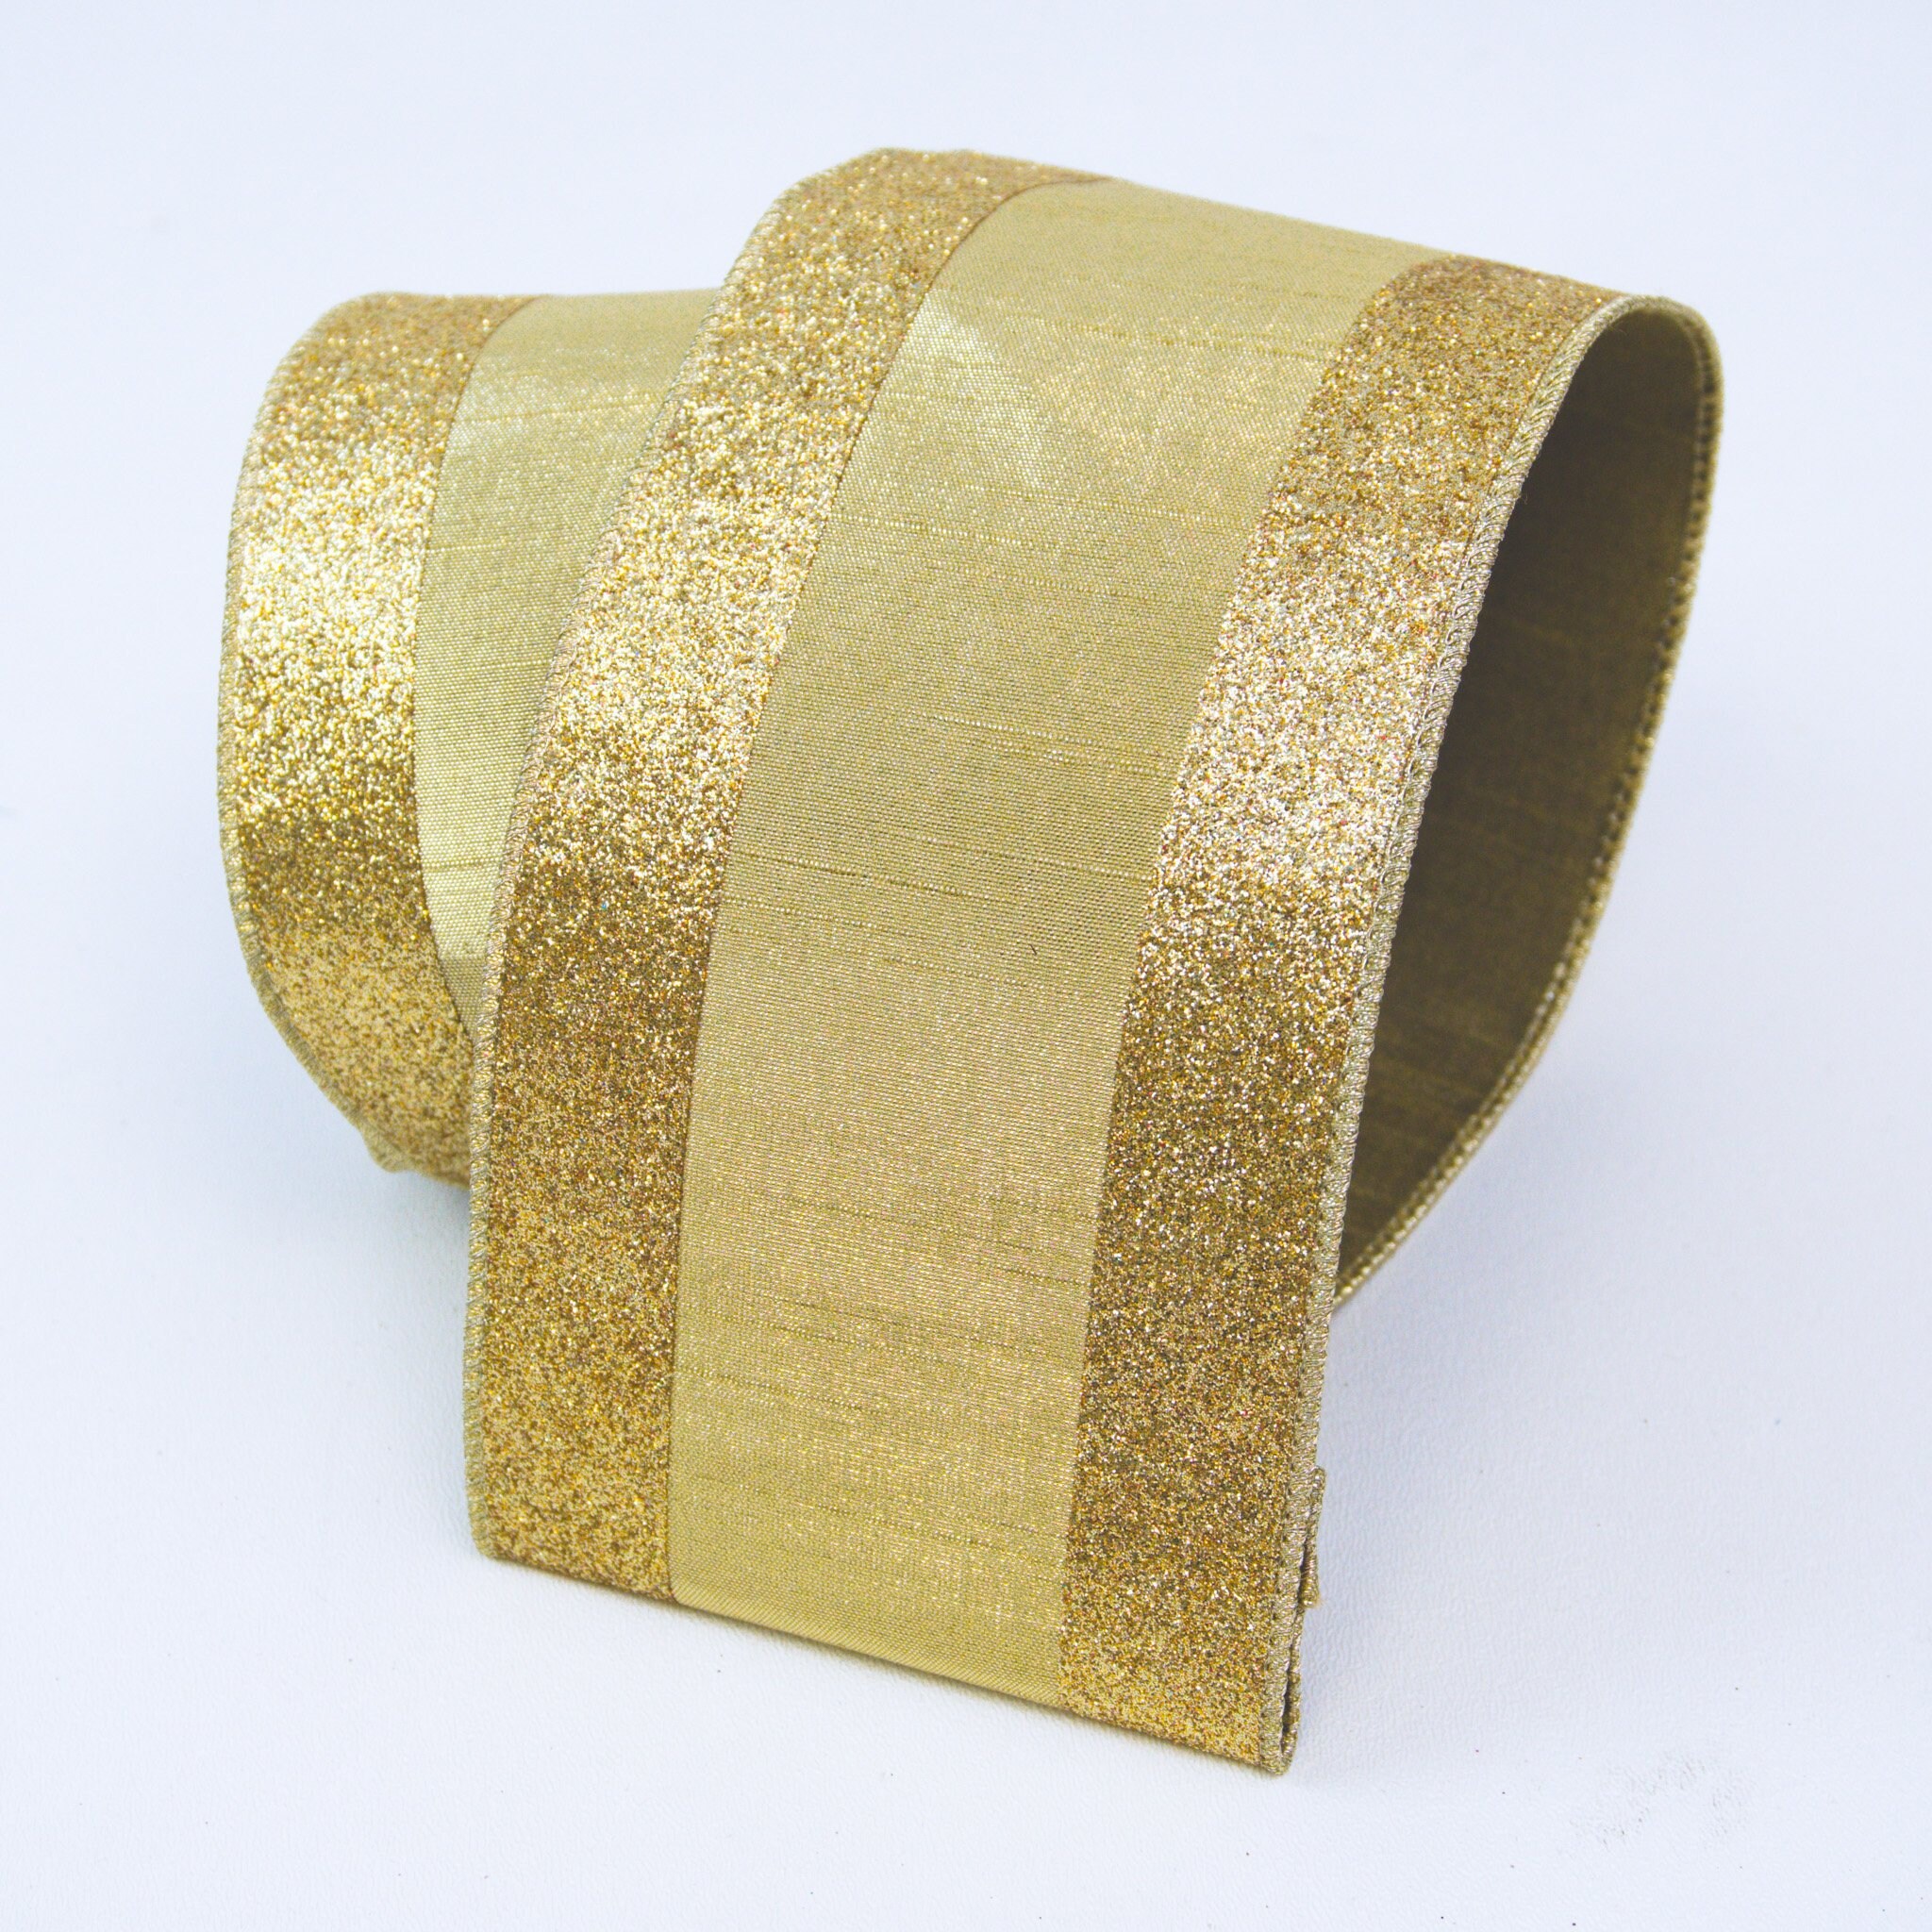 Fondersy 10-Yard Old Gold Burlap Ribbon Wired Burlap Ribbon - 3 inch Width for Gift Wrapping, Floral Arrangements, Wreath Making, and Christmas Decor